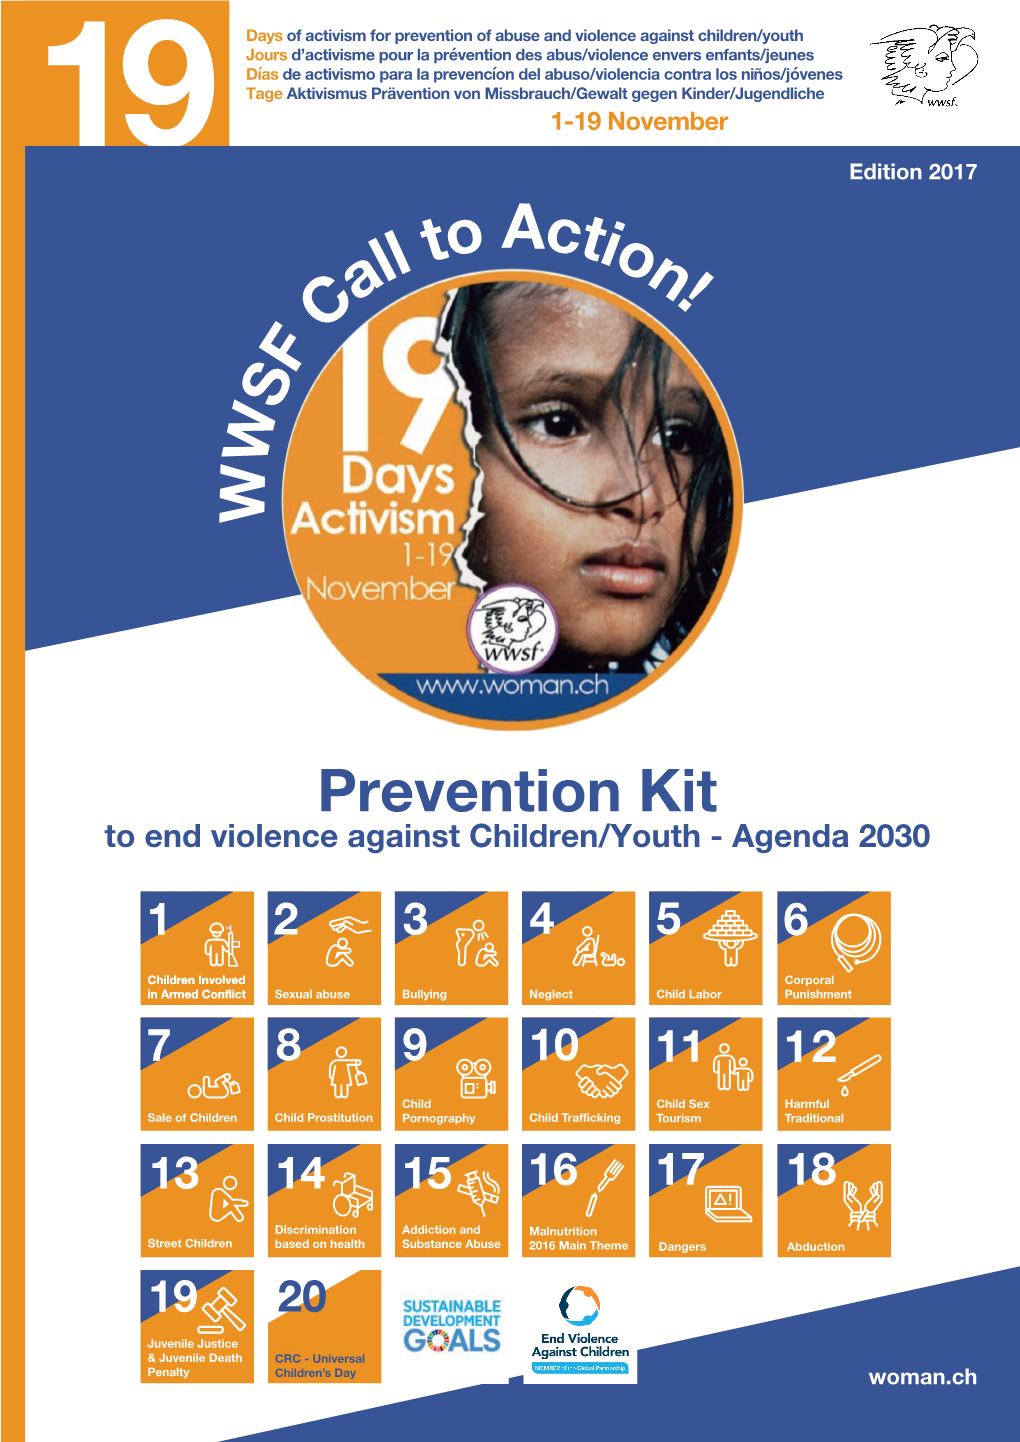 Prevention Kit to End Violence Against Children/Youth - Agenda 2030